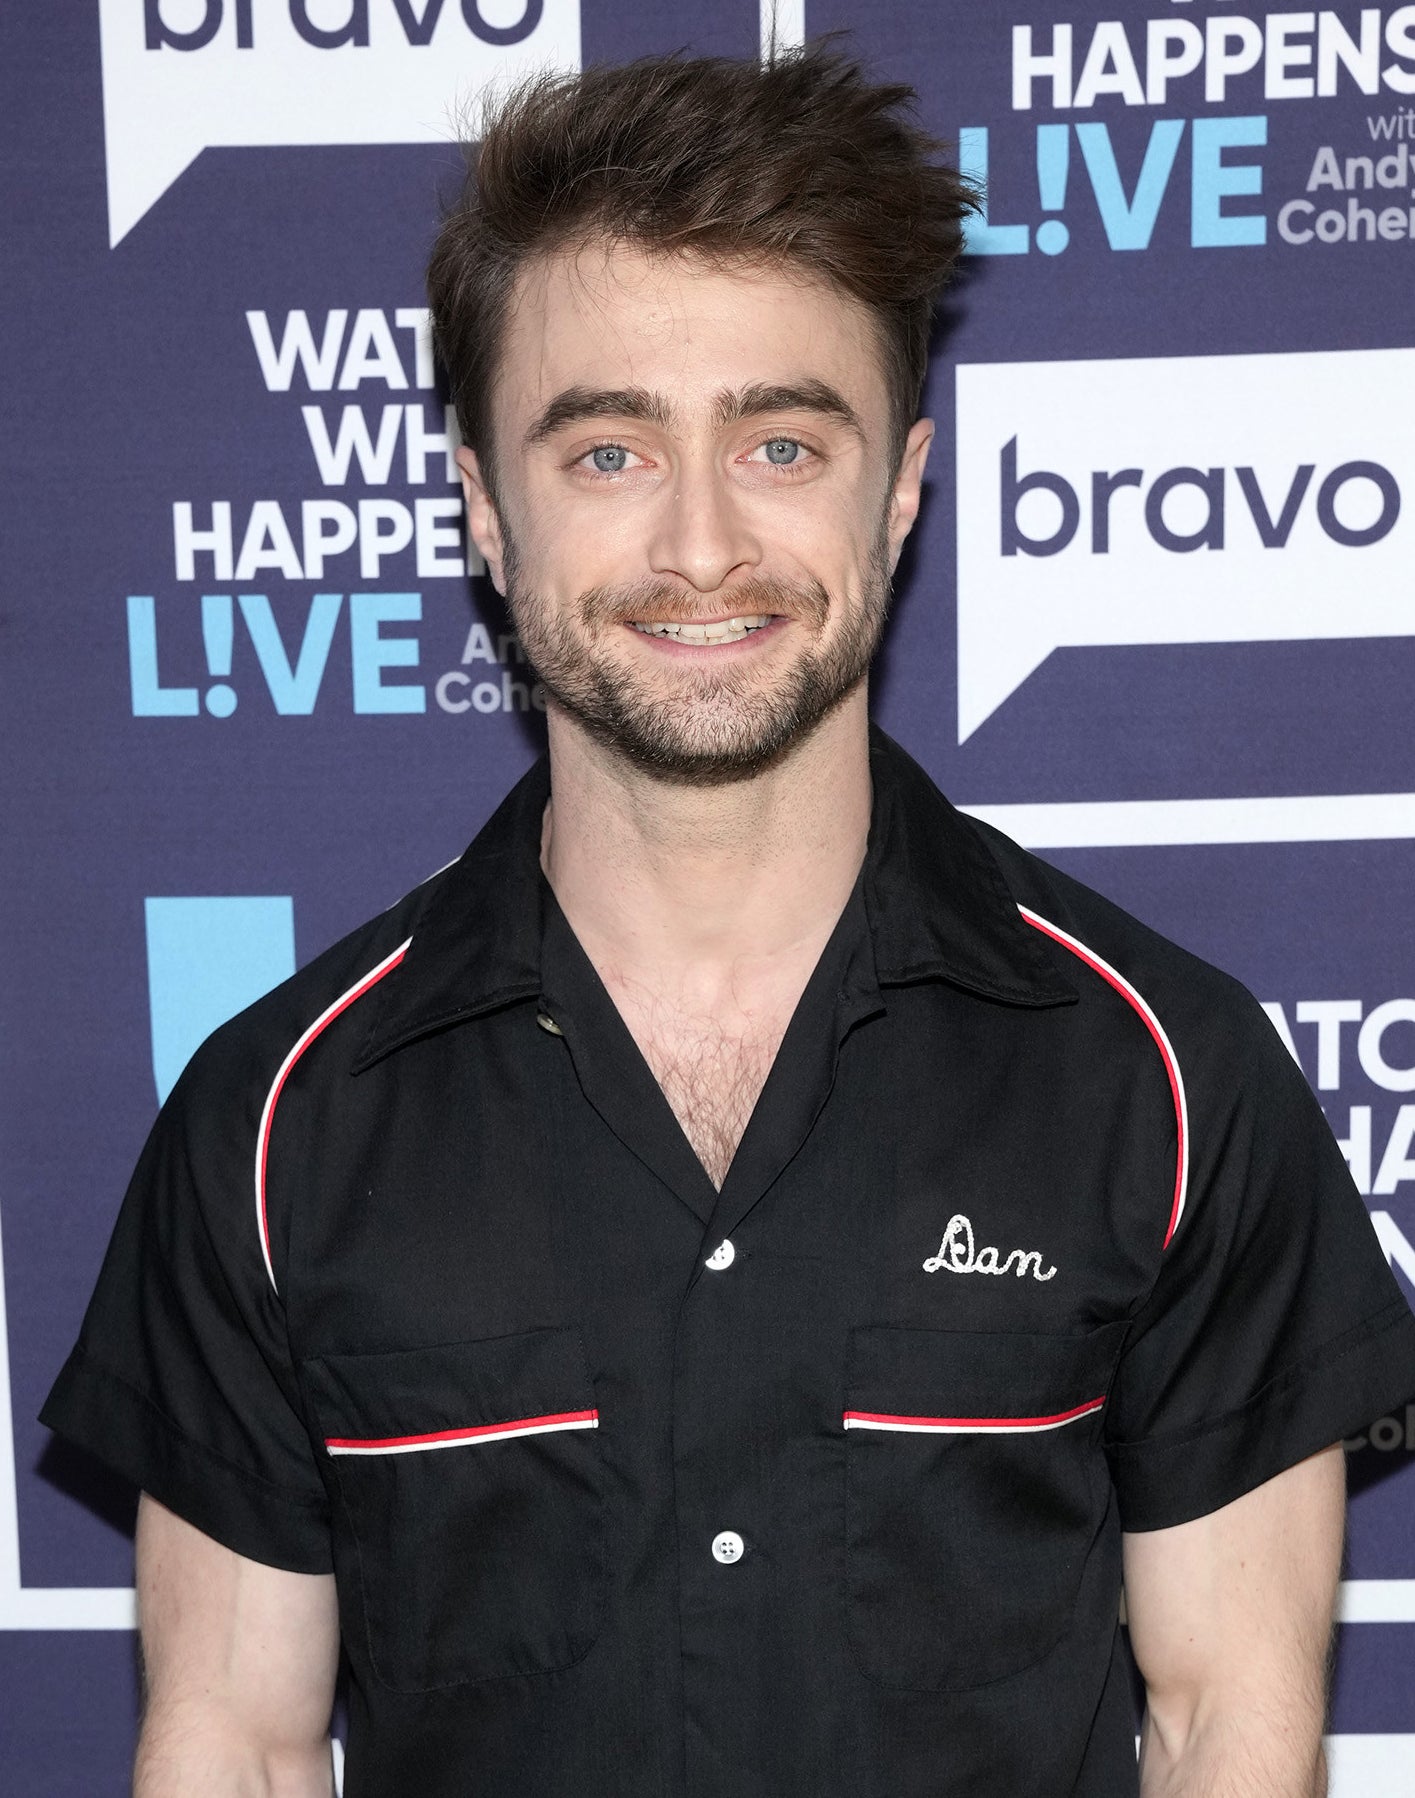 Daniel Radcliffe smiling at an event